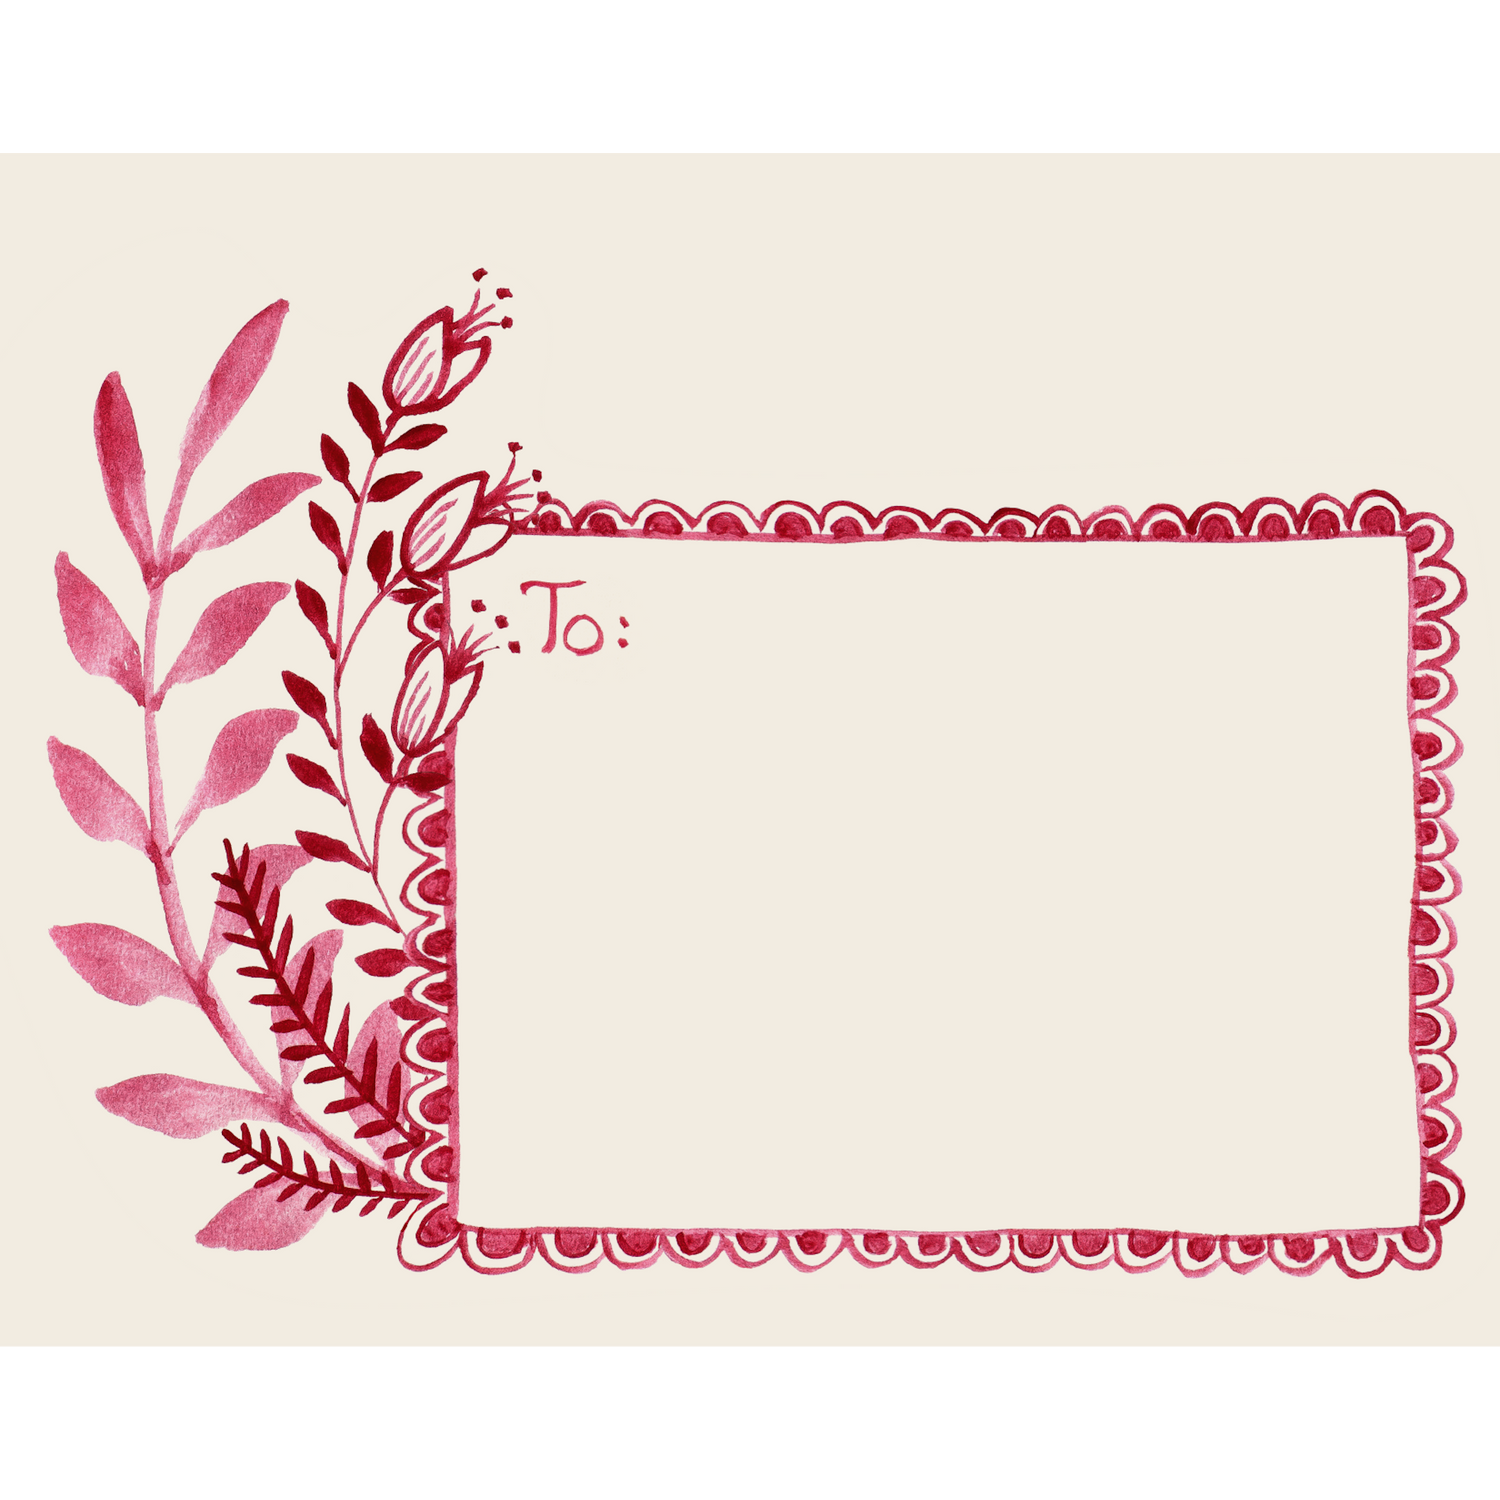 A Love Letter Fold Note Card with red flowers and leaves on a beige background, ready to fold and mail from Hester &amp; Cook.